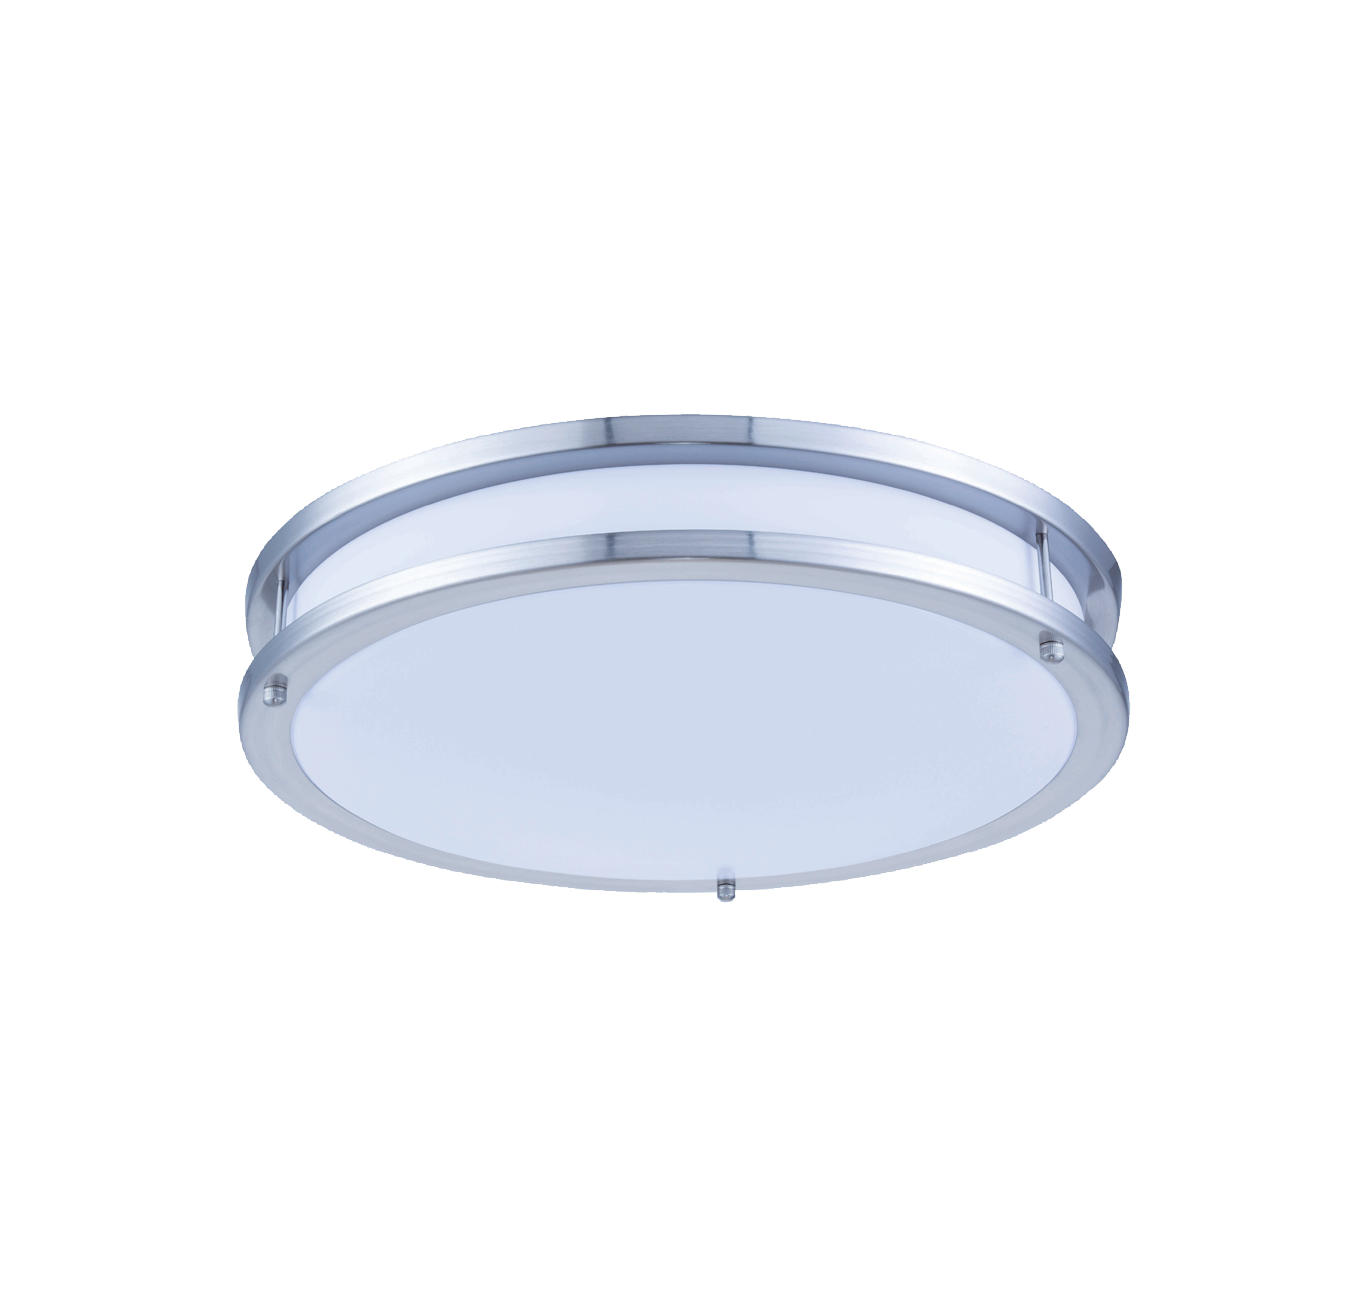 Two-Ring Ceiling Light